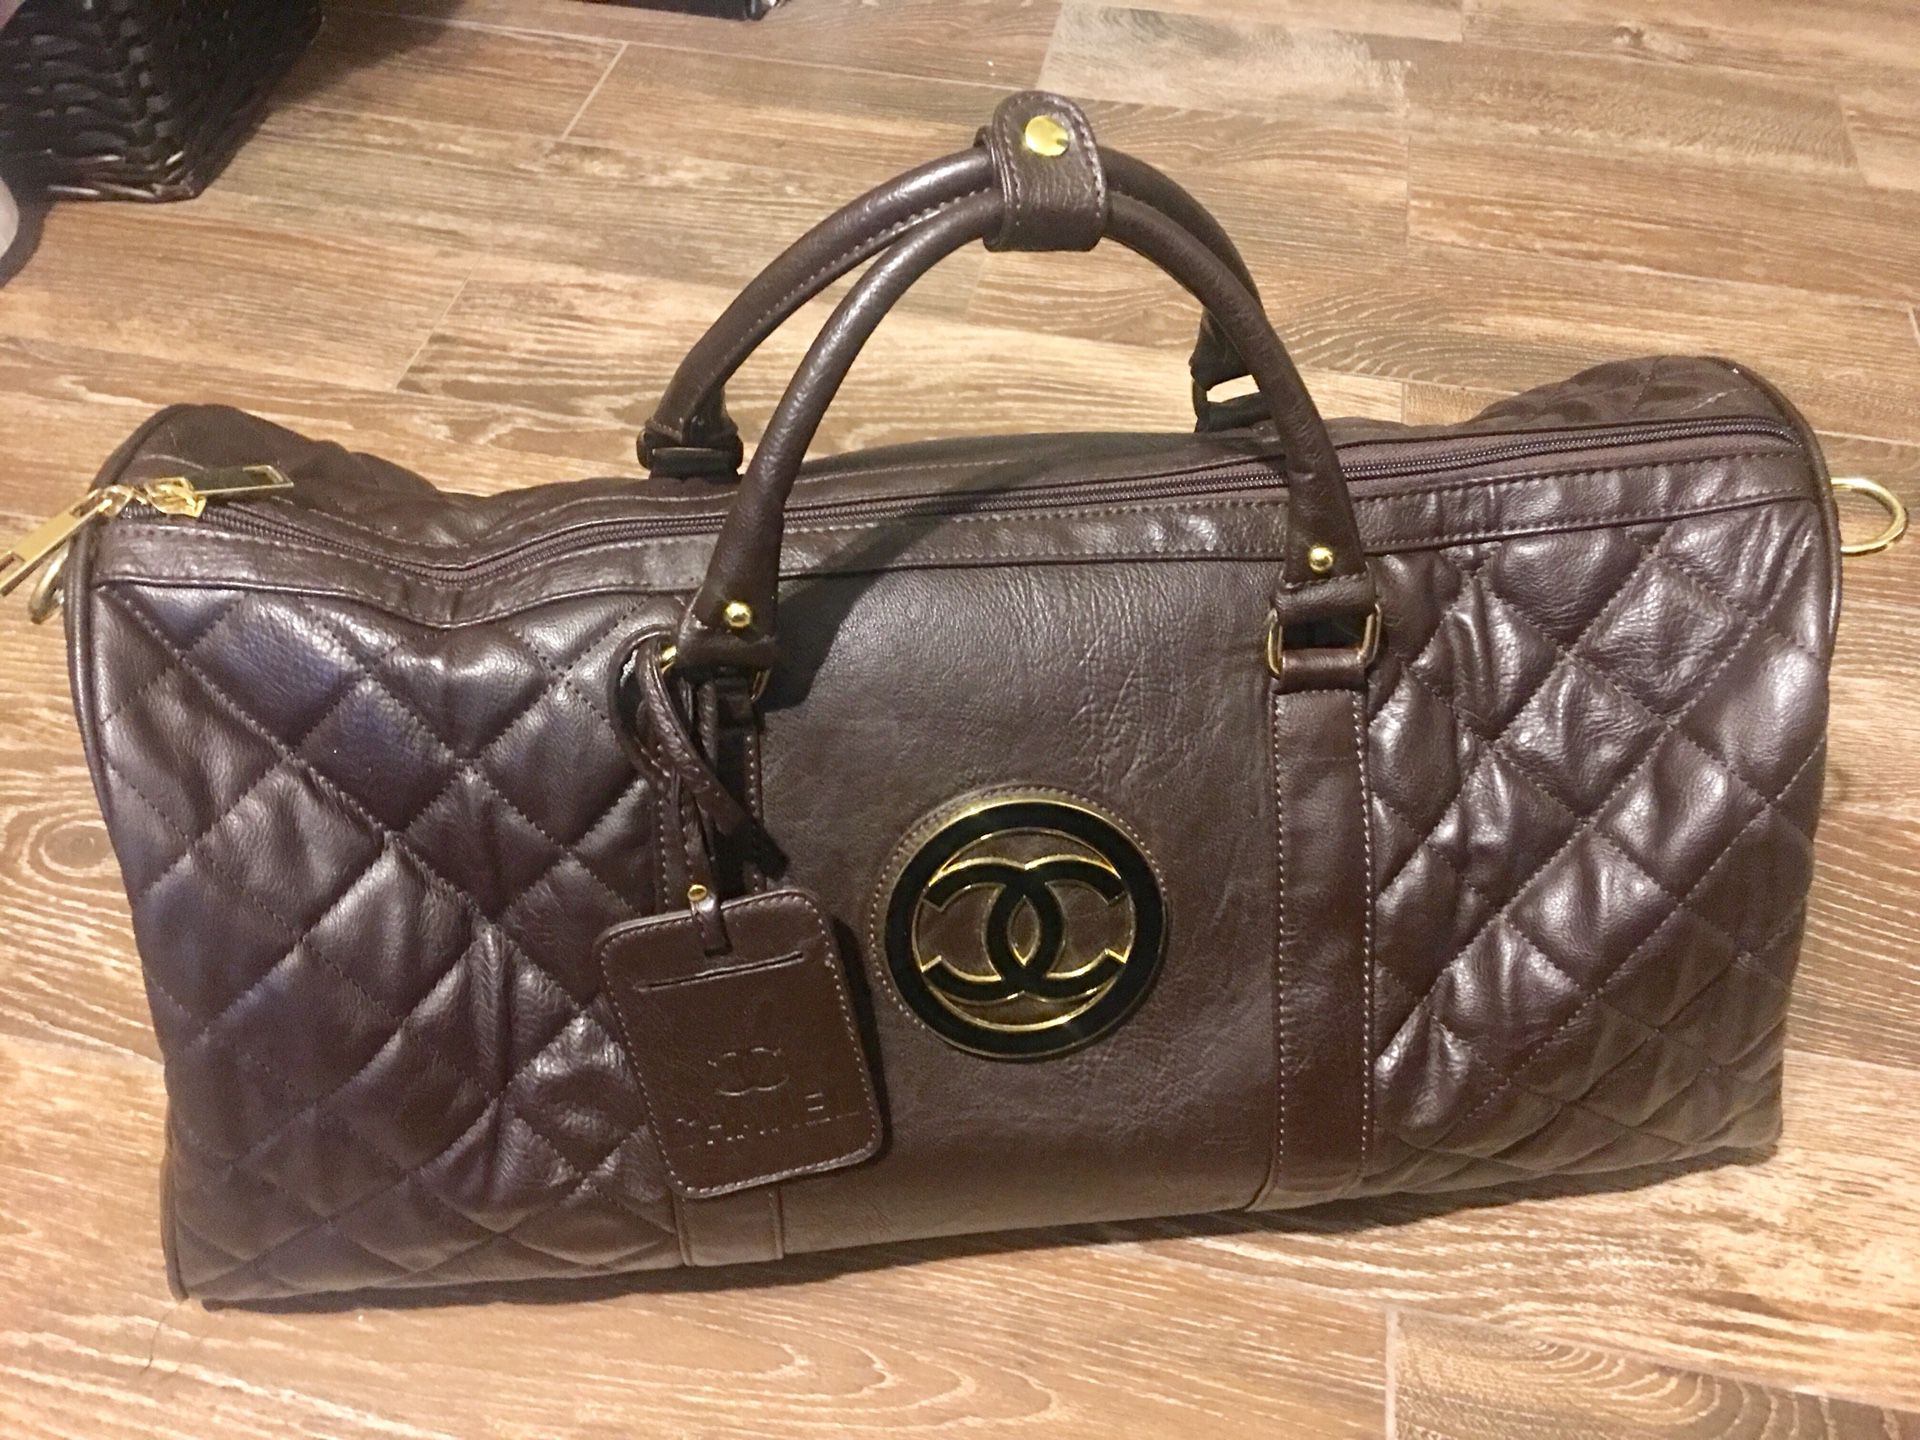 LEATHER CHANEL DUFFLE BAG WITH SERIAL LOGO ON SIDE